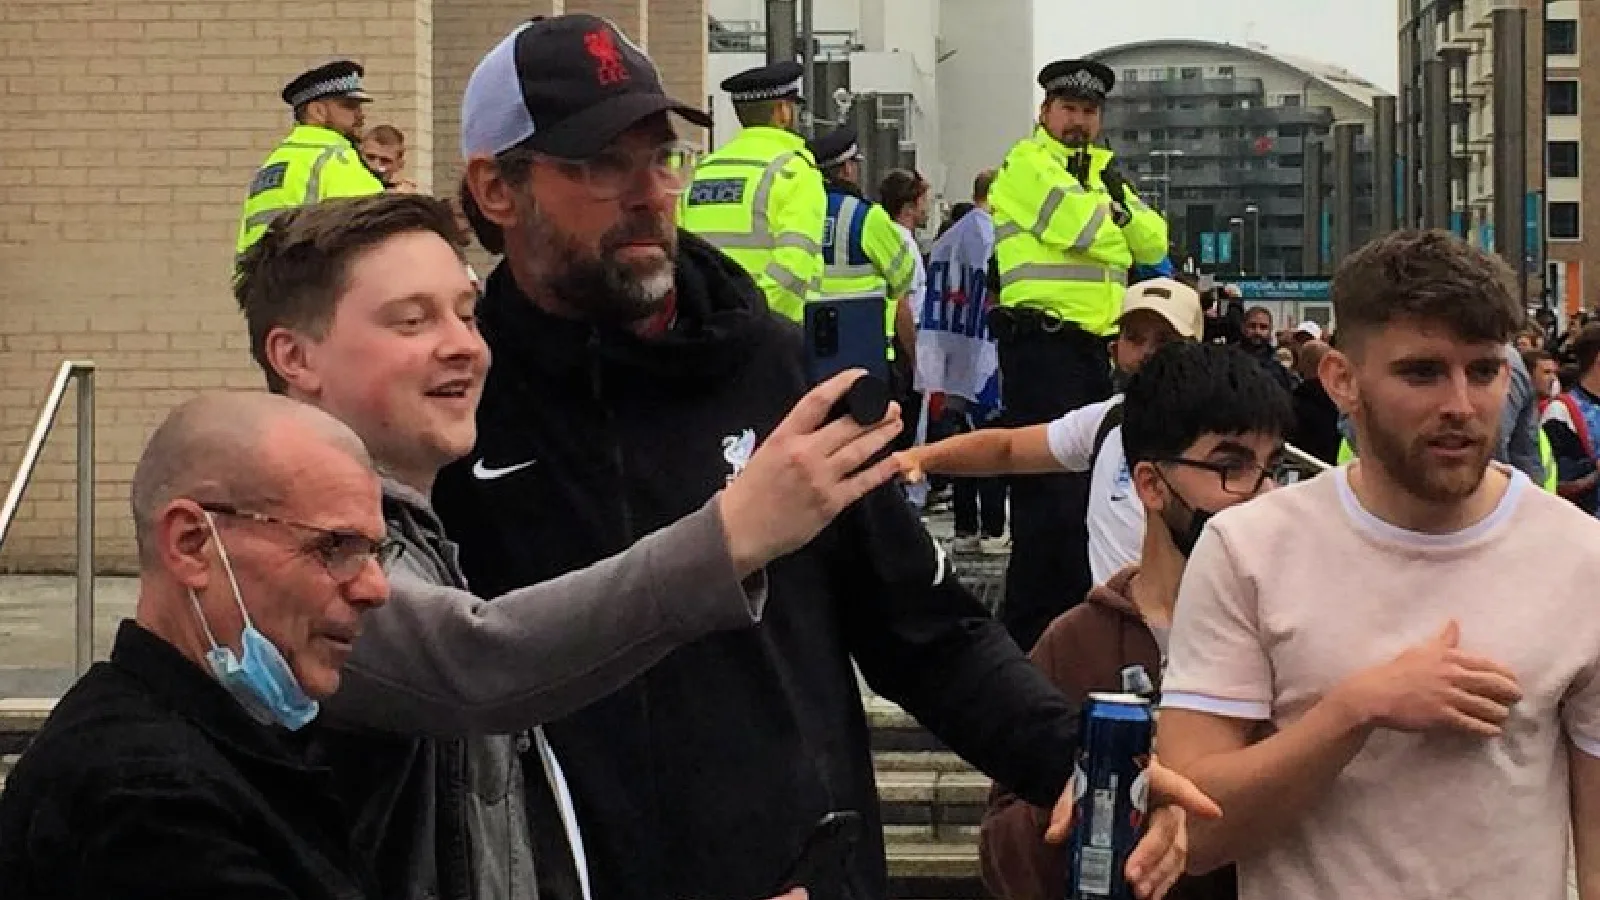 Jurgen Klopp lookalike spotted taking pictures with England fans outside Wembley